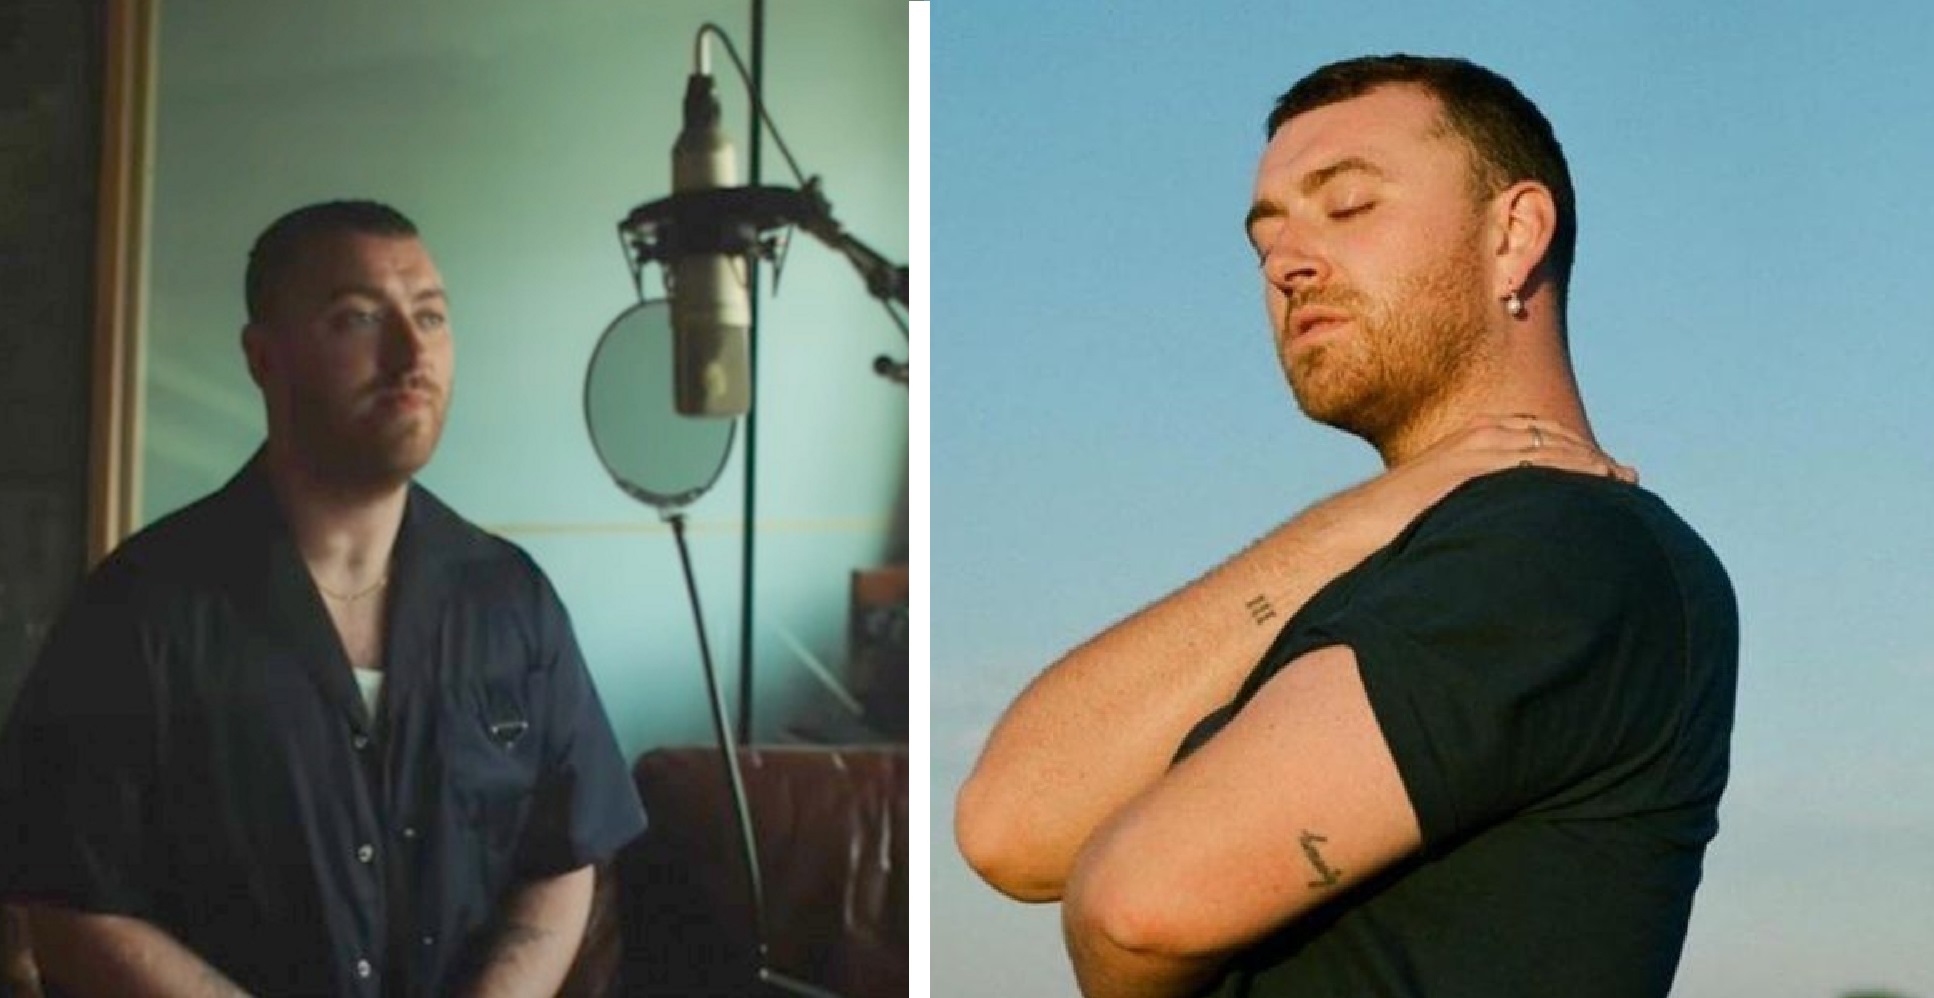 We Aren’t Appreciating Sam Smith’s Voice Enough: Listen To Their Fantastic New Acoustic Performance [Diamonds]